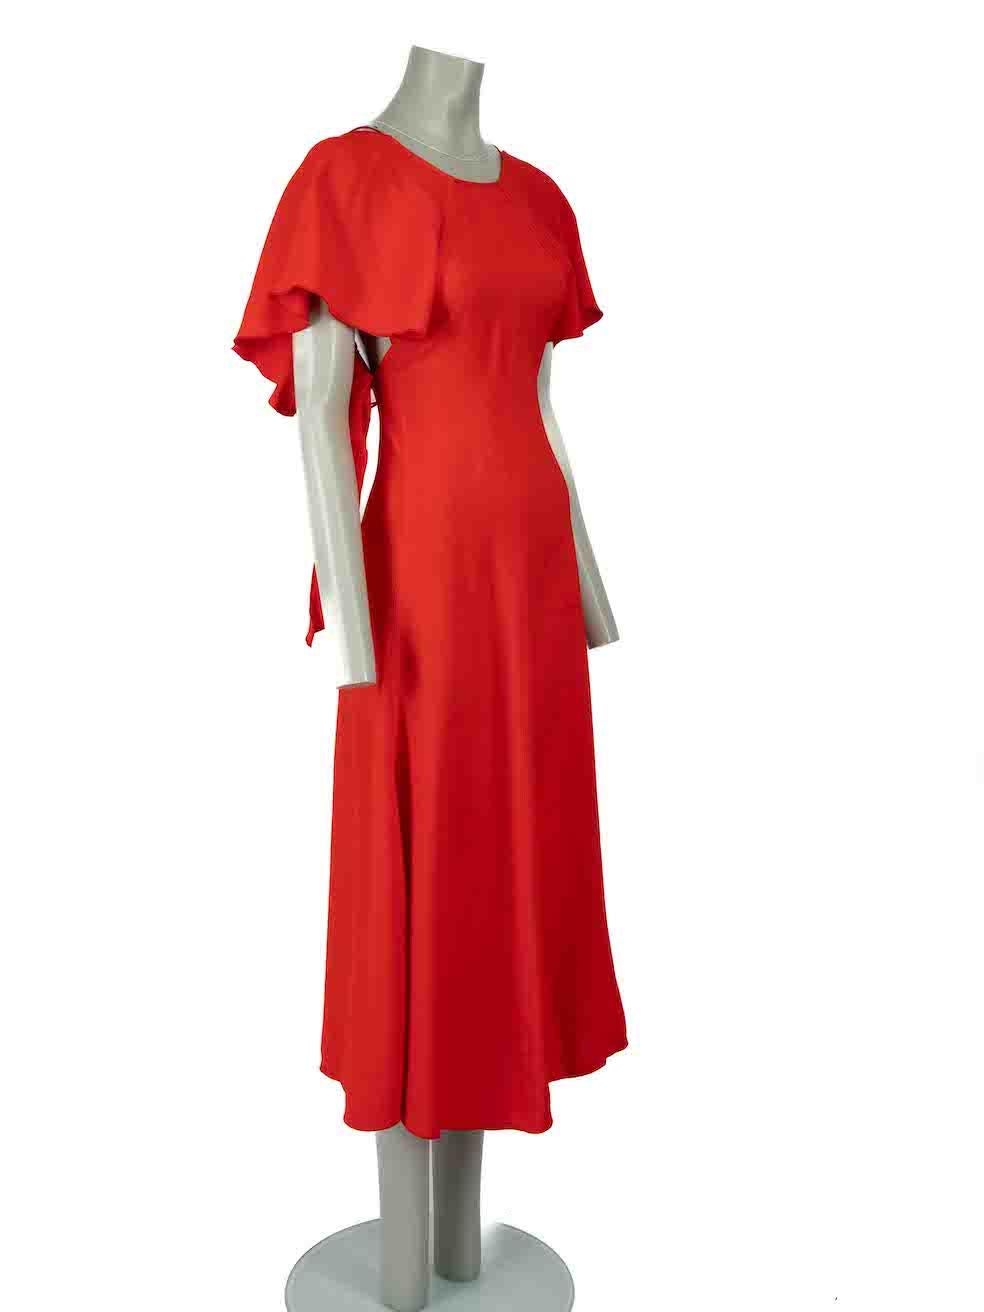 CONDITION is Very good. Minimal wear to dress is evident. Minimal bleach stain to front and stain marks to the lower left skirt is evident on this used Victoria Beckham designer resale item.

Details
Red
Viscose
Midi dress
Round neckline
Open back